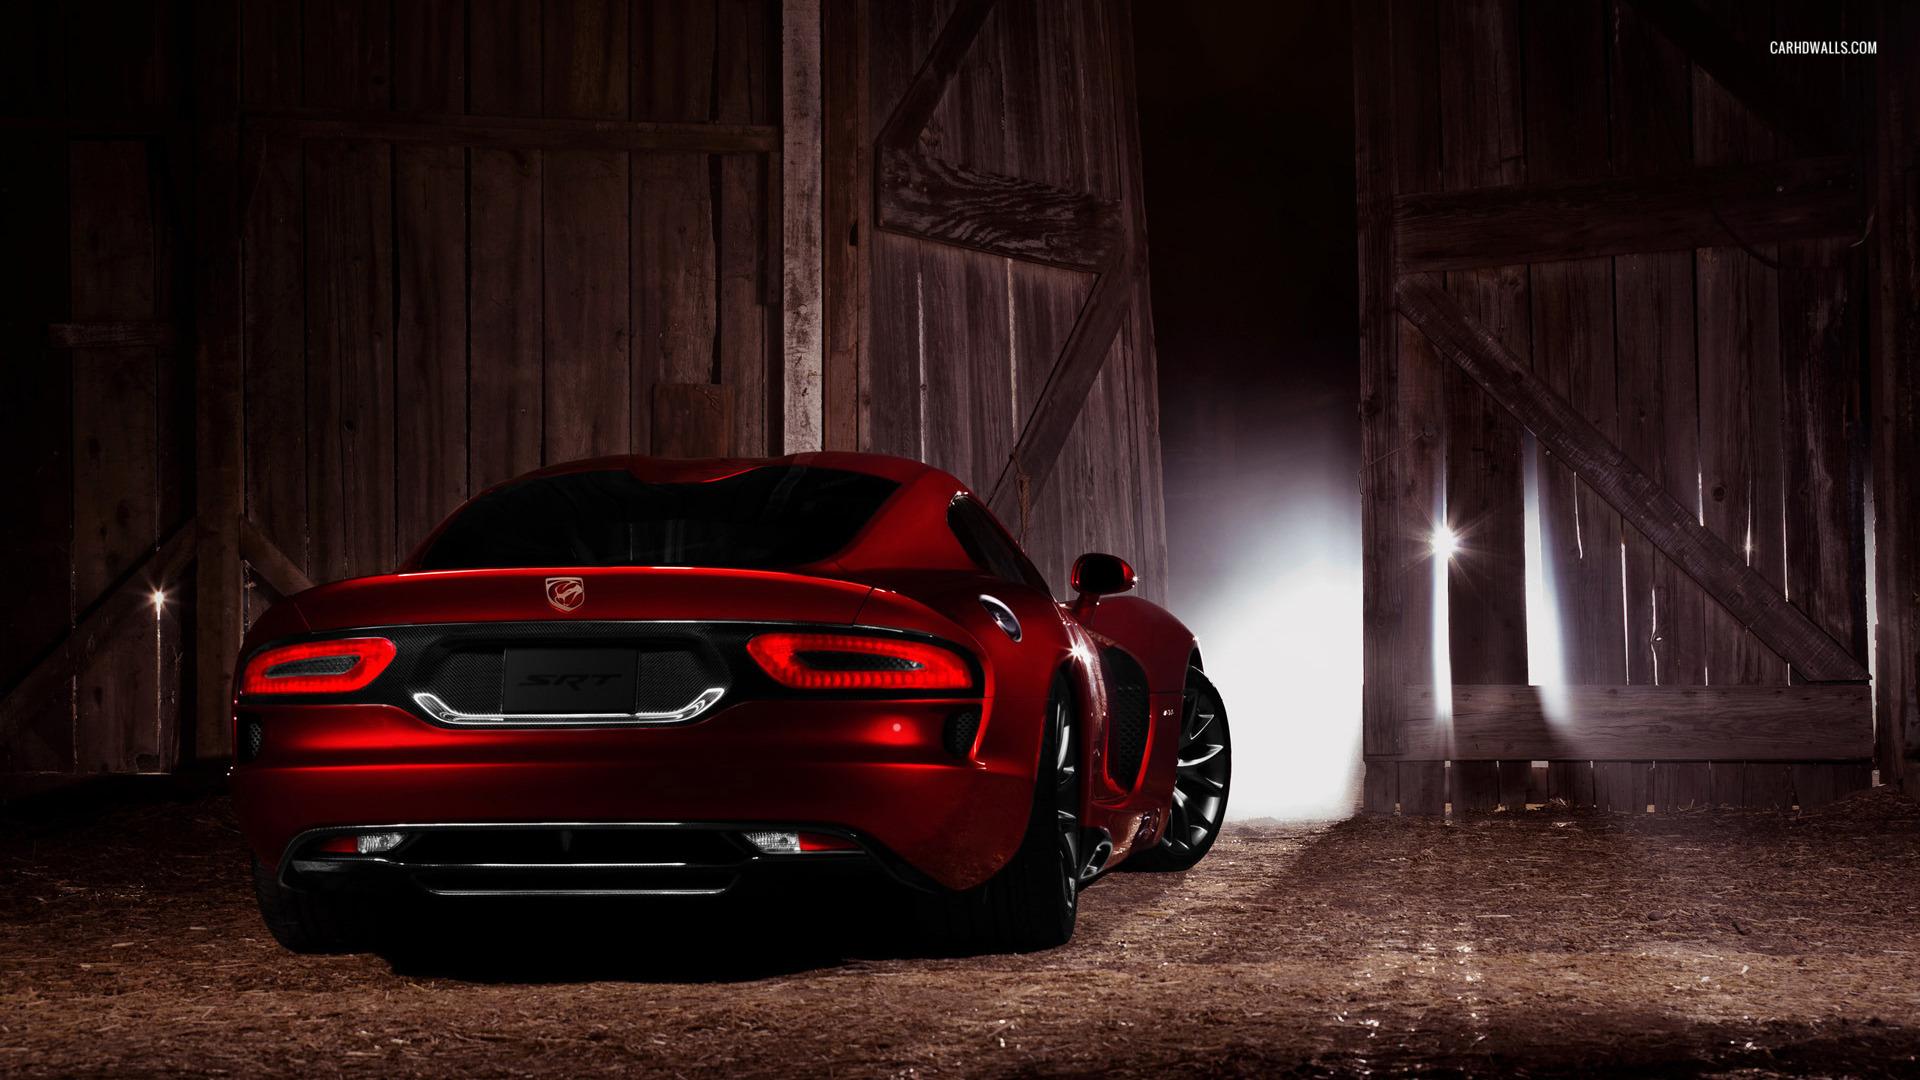 Dodge Viper Wallpaper HD Photo, Wallpaper and other Image